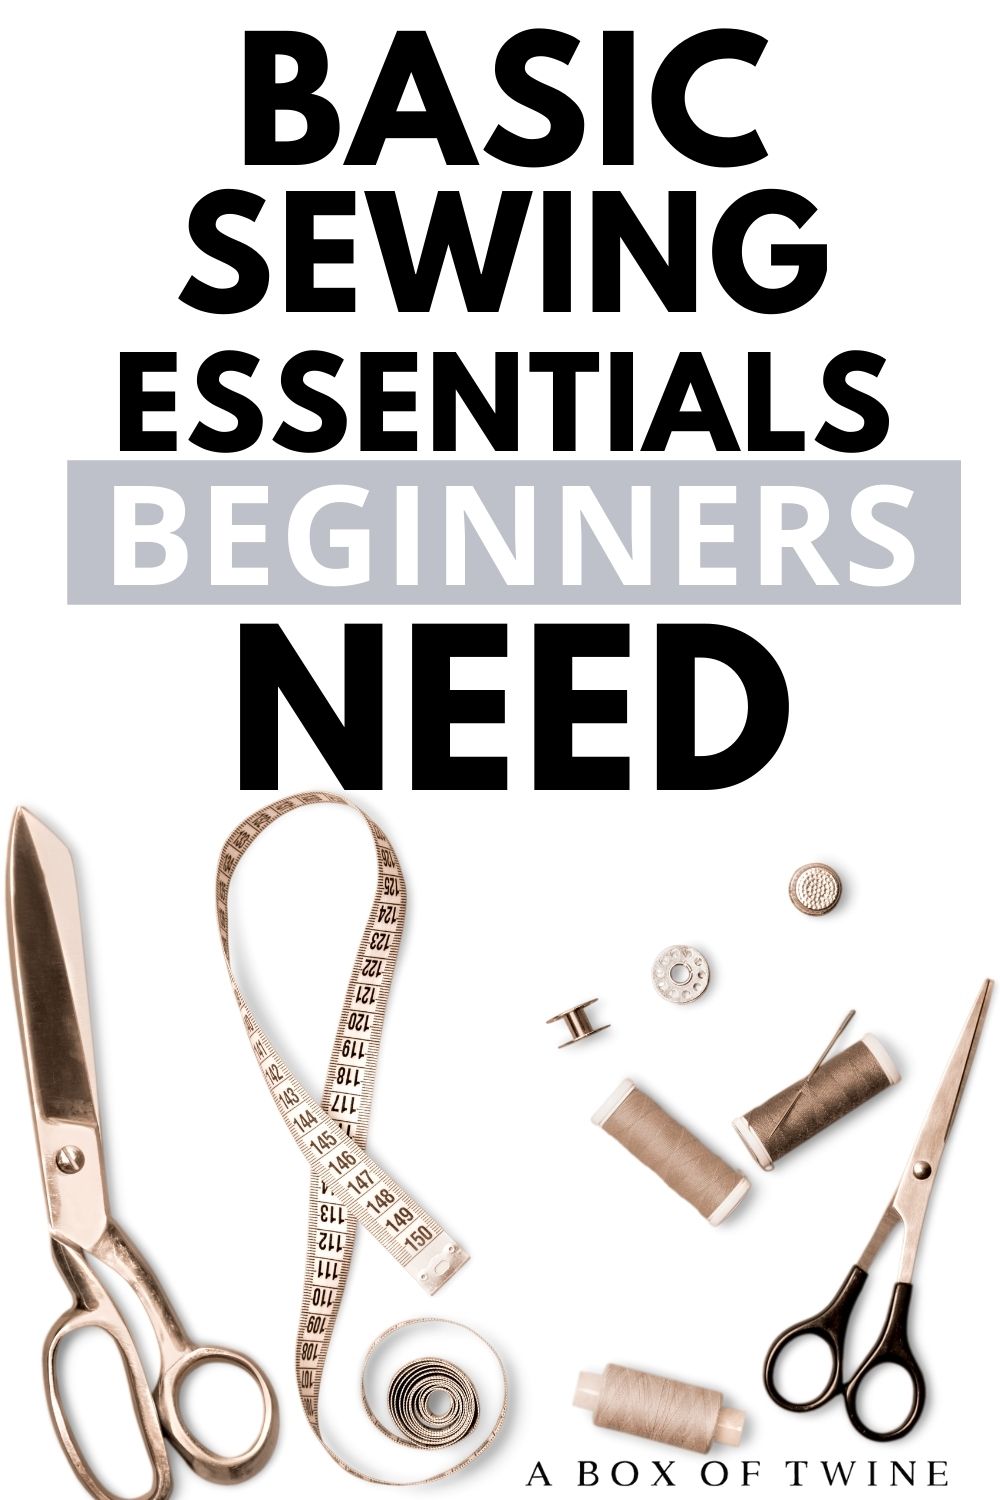 Sewing Essentials for Beginners - 20 Things You NEED - A BOX OF TWINE